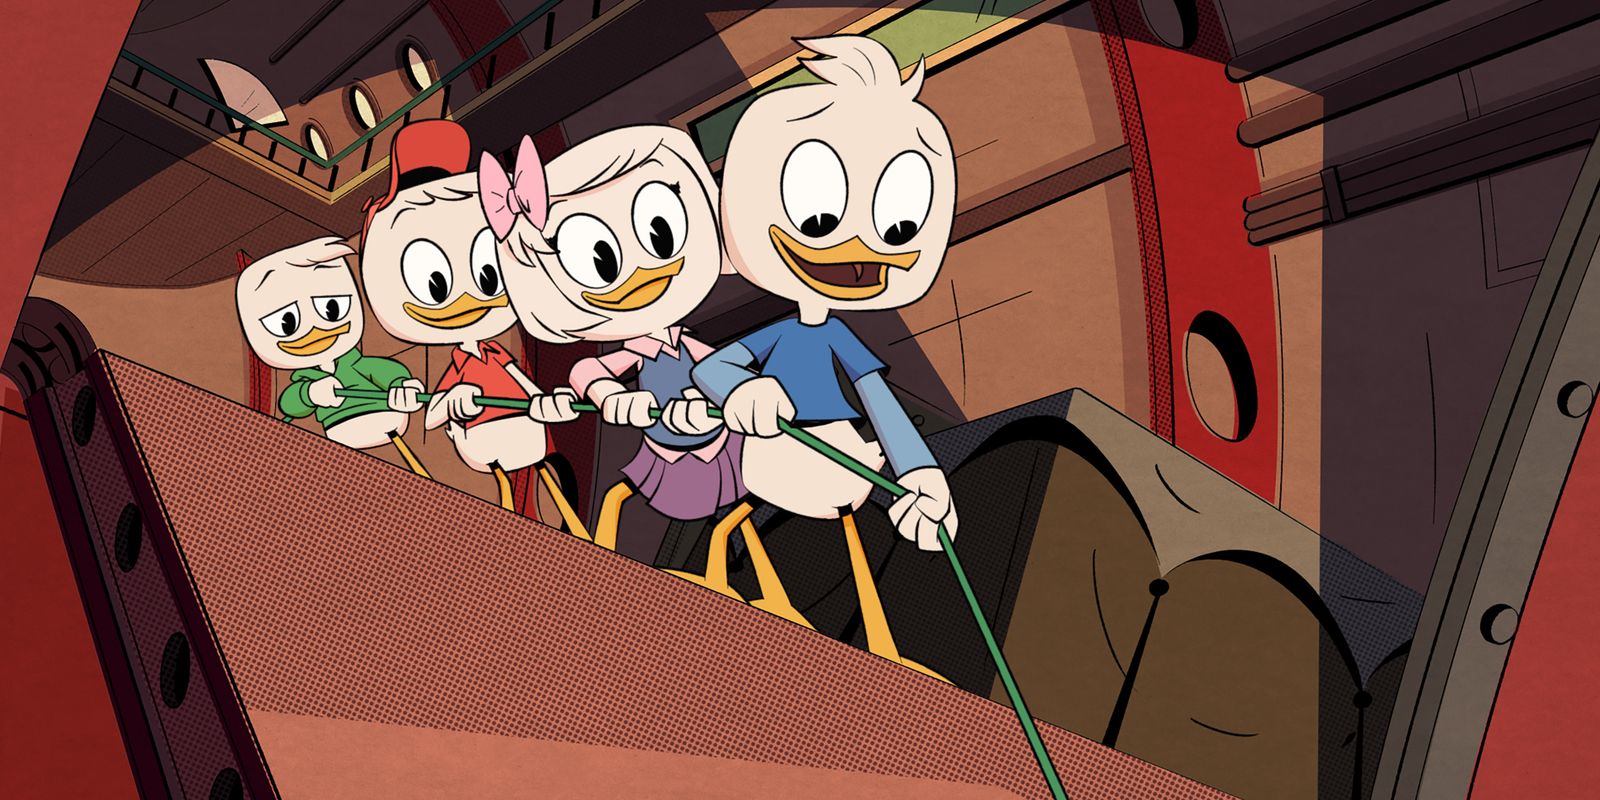 The young ducks pull a rope from DuckTales